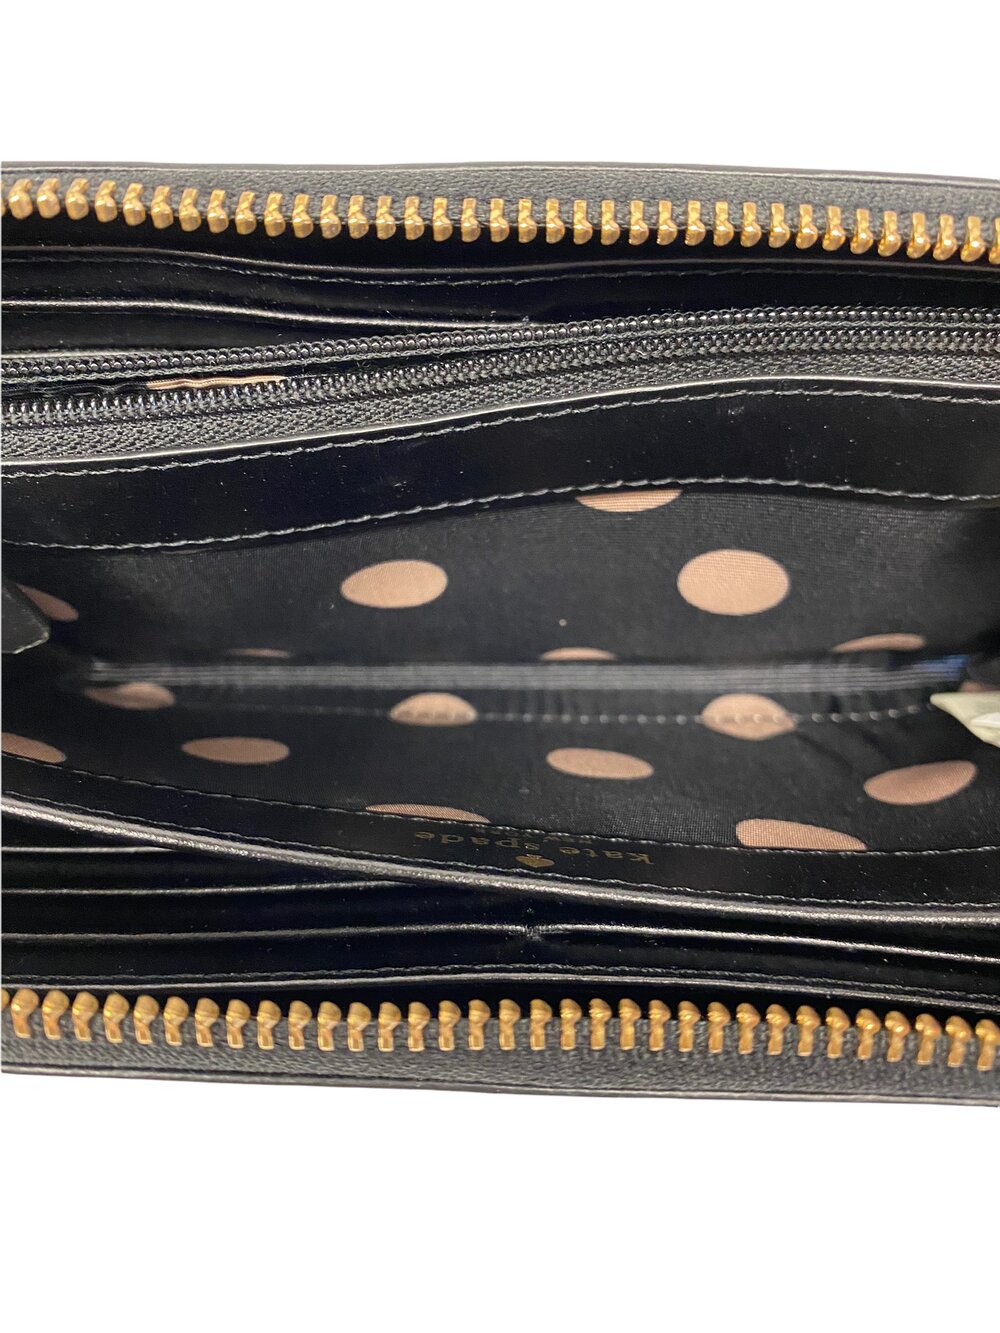 Pre-owned Kate Spade Patent Leather Wallet – Sabrina's Closet